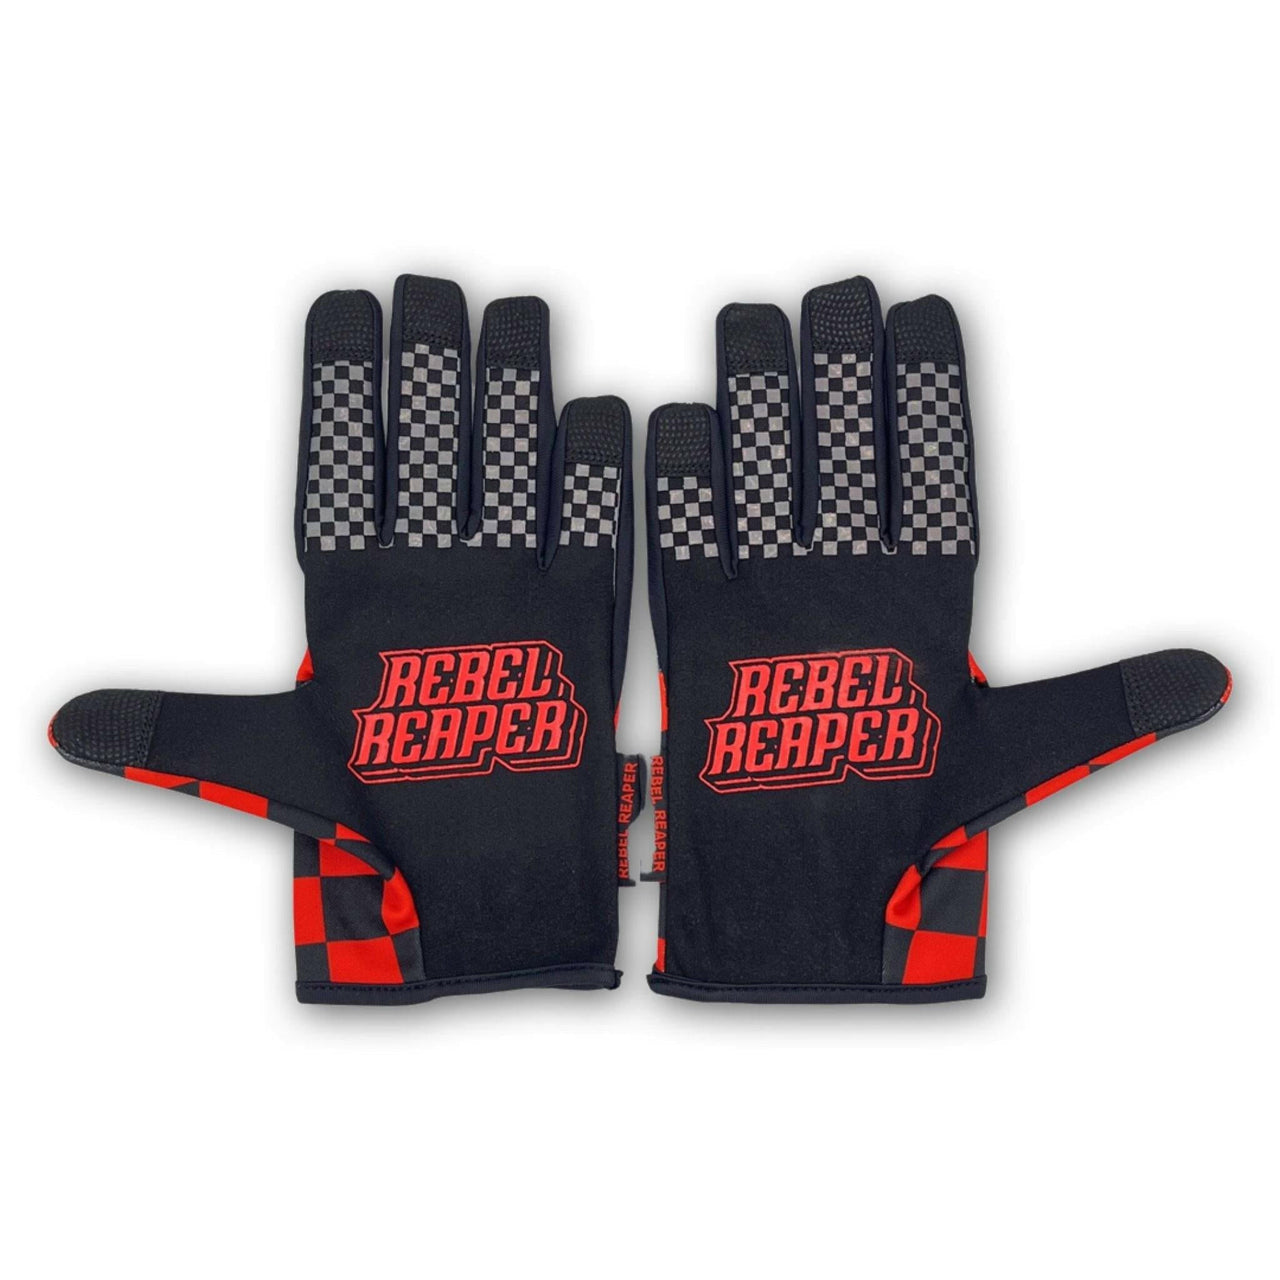 Red Black Checkered Lightweight Gloves - Rebel Reaper Clothing Company Lightweight Moto Gloves